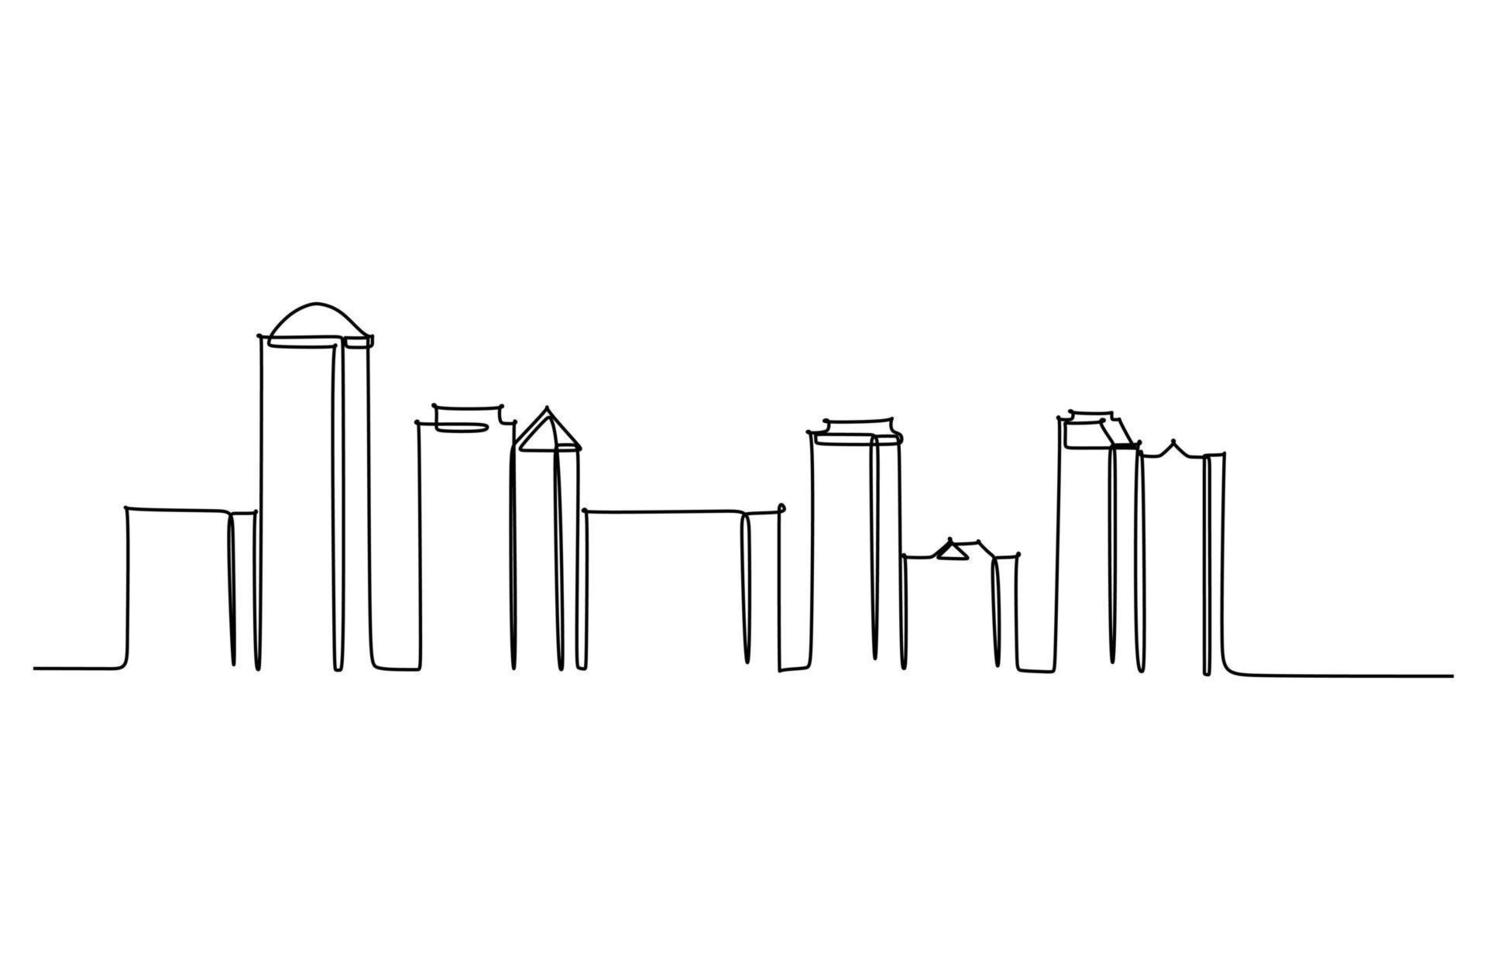 Single line drawing of apartment buildings. Town and buildings landscape model. Best holiday destination wall decor art. Editable trendy continuous line draw design vector illustration